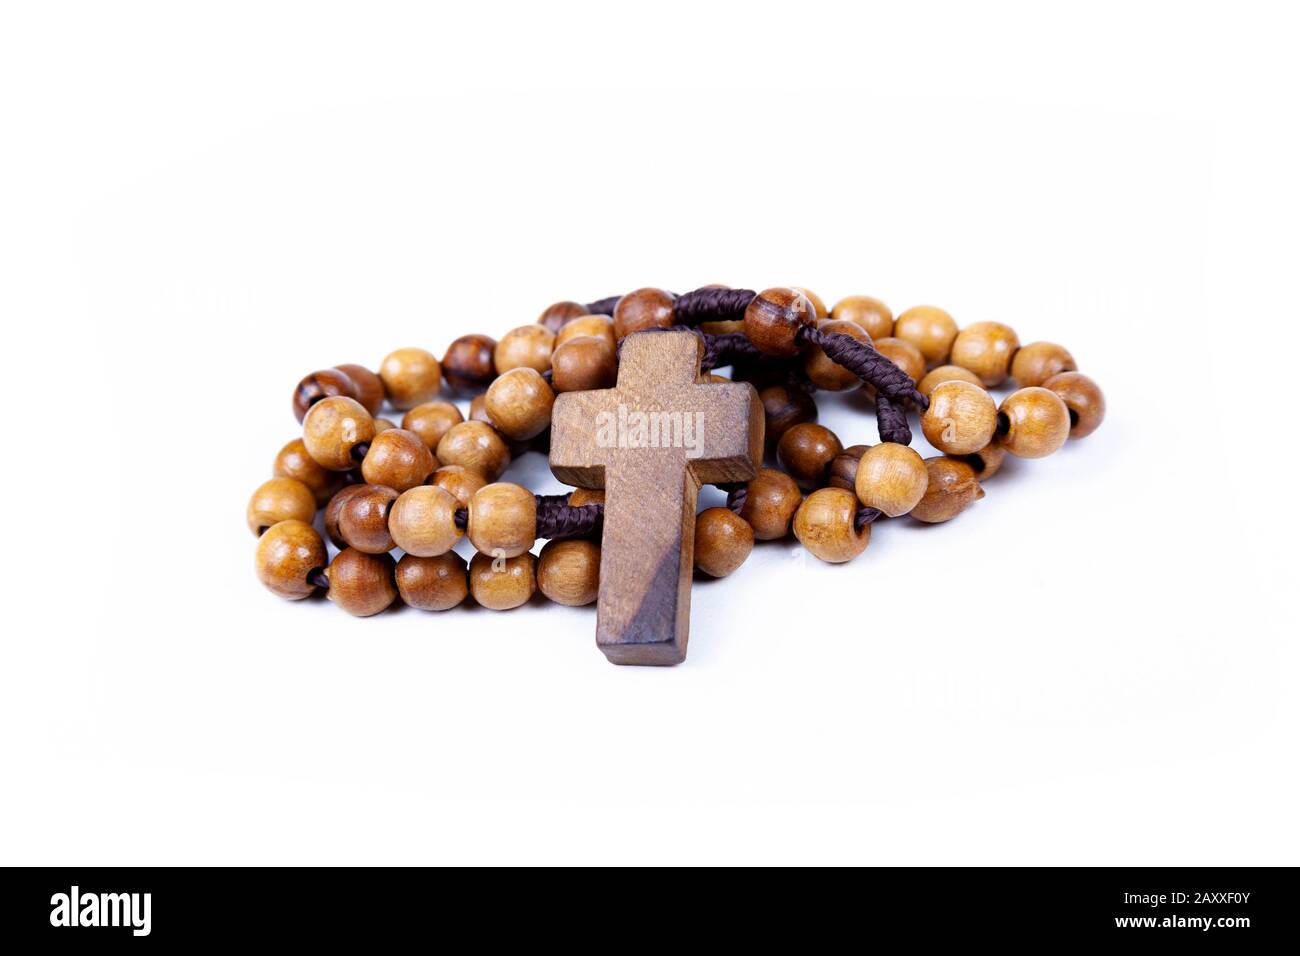 Brown wooden christian rosary curled up, christianity religious symbols isolated on white. Cross symbol in the middle. Chaplet of Divine Mercy prayer Stock Photo